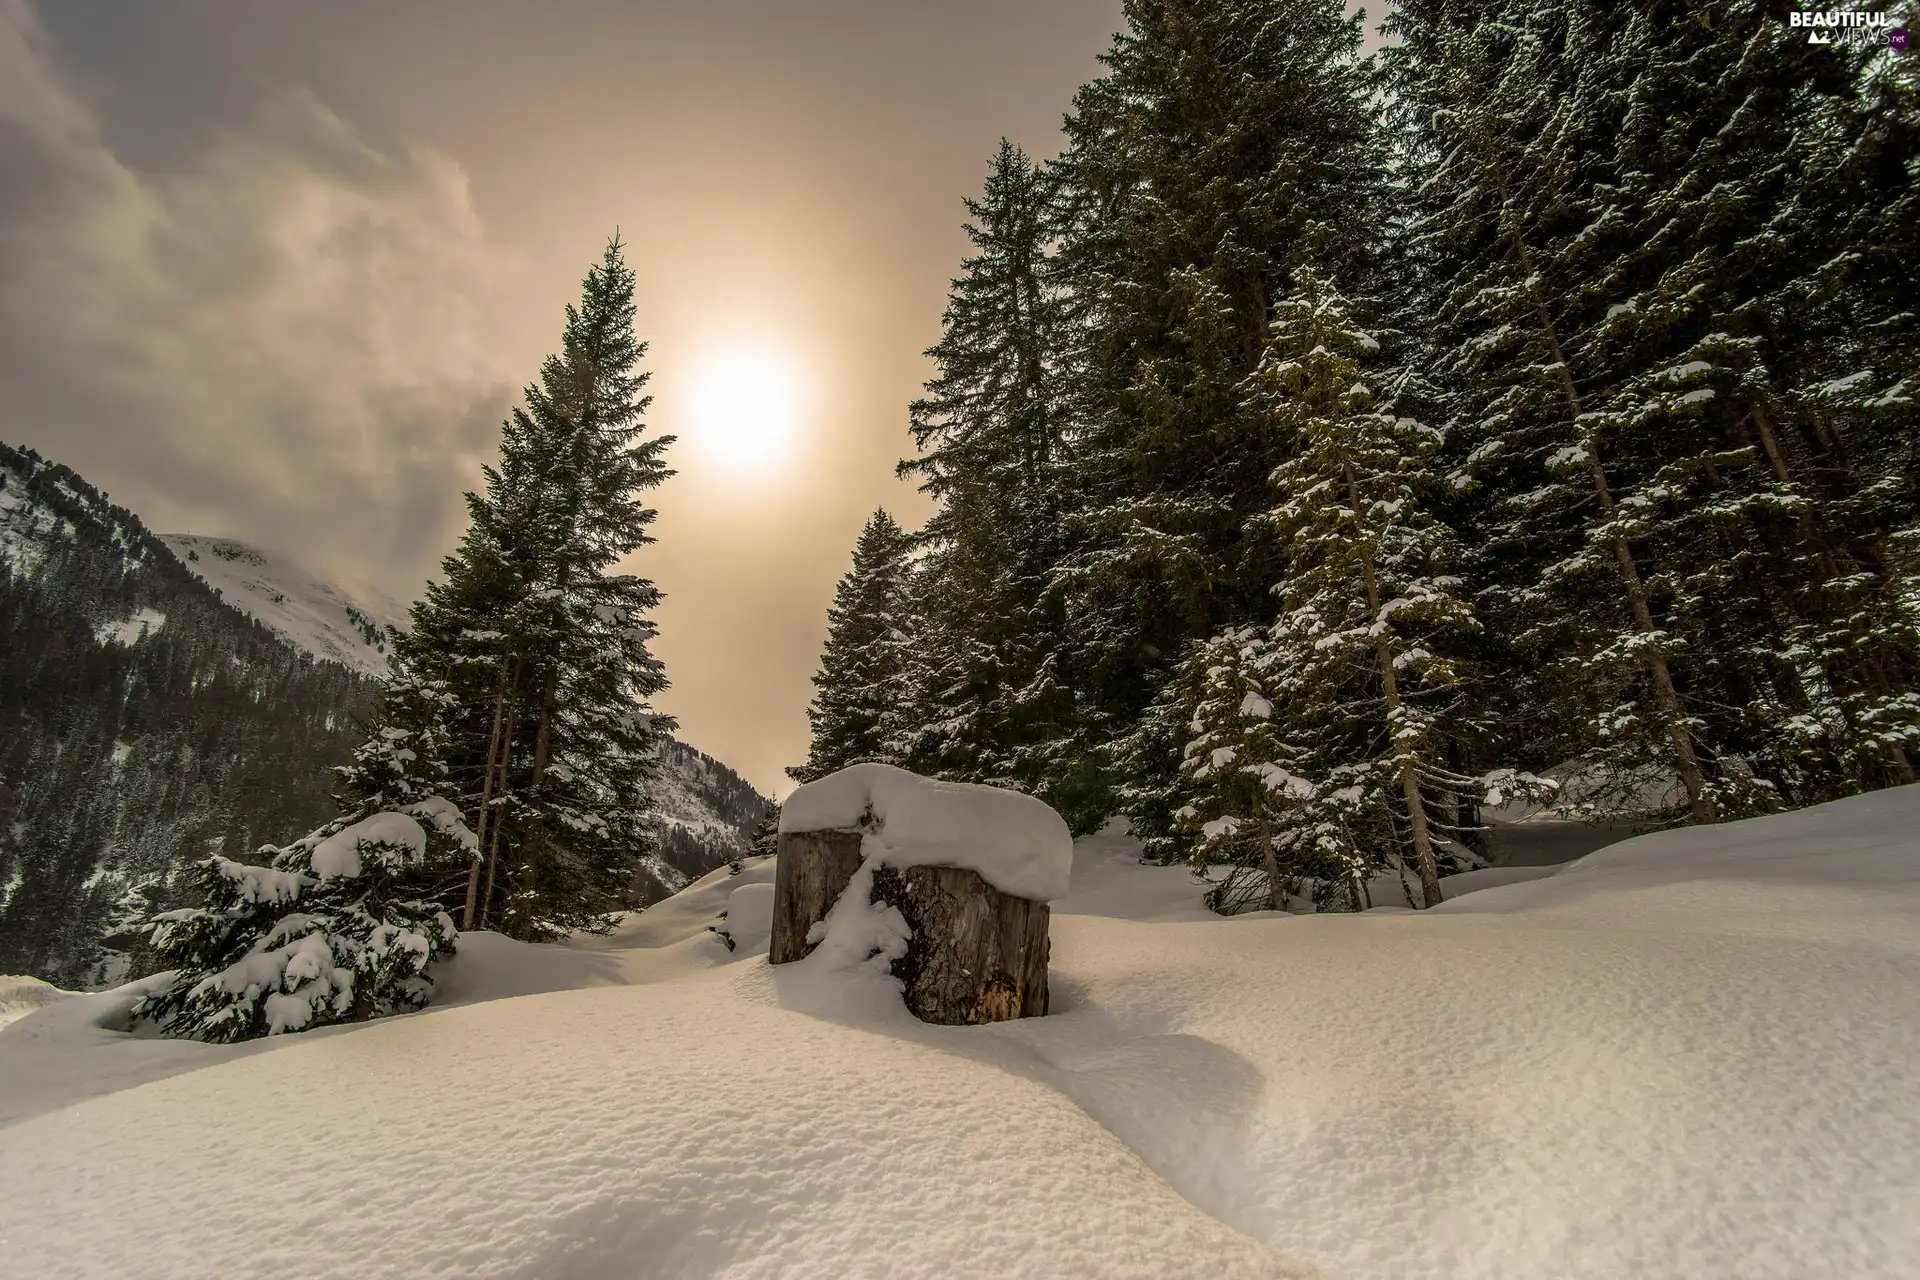 drifts, Mountains, trees, viewes, winter, Great Sunsets, snow, clouds, forest